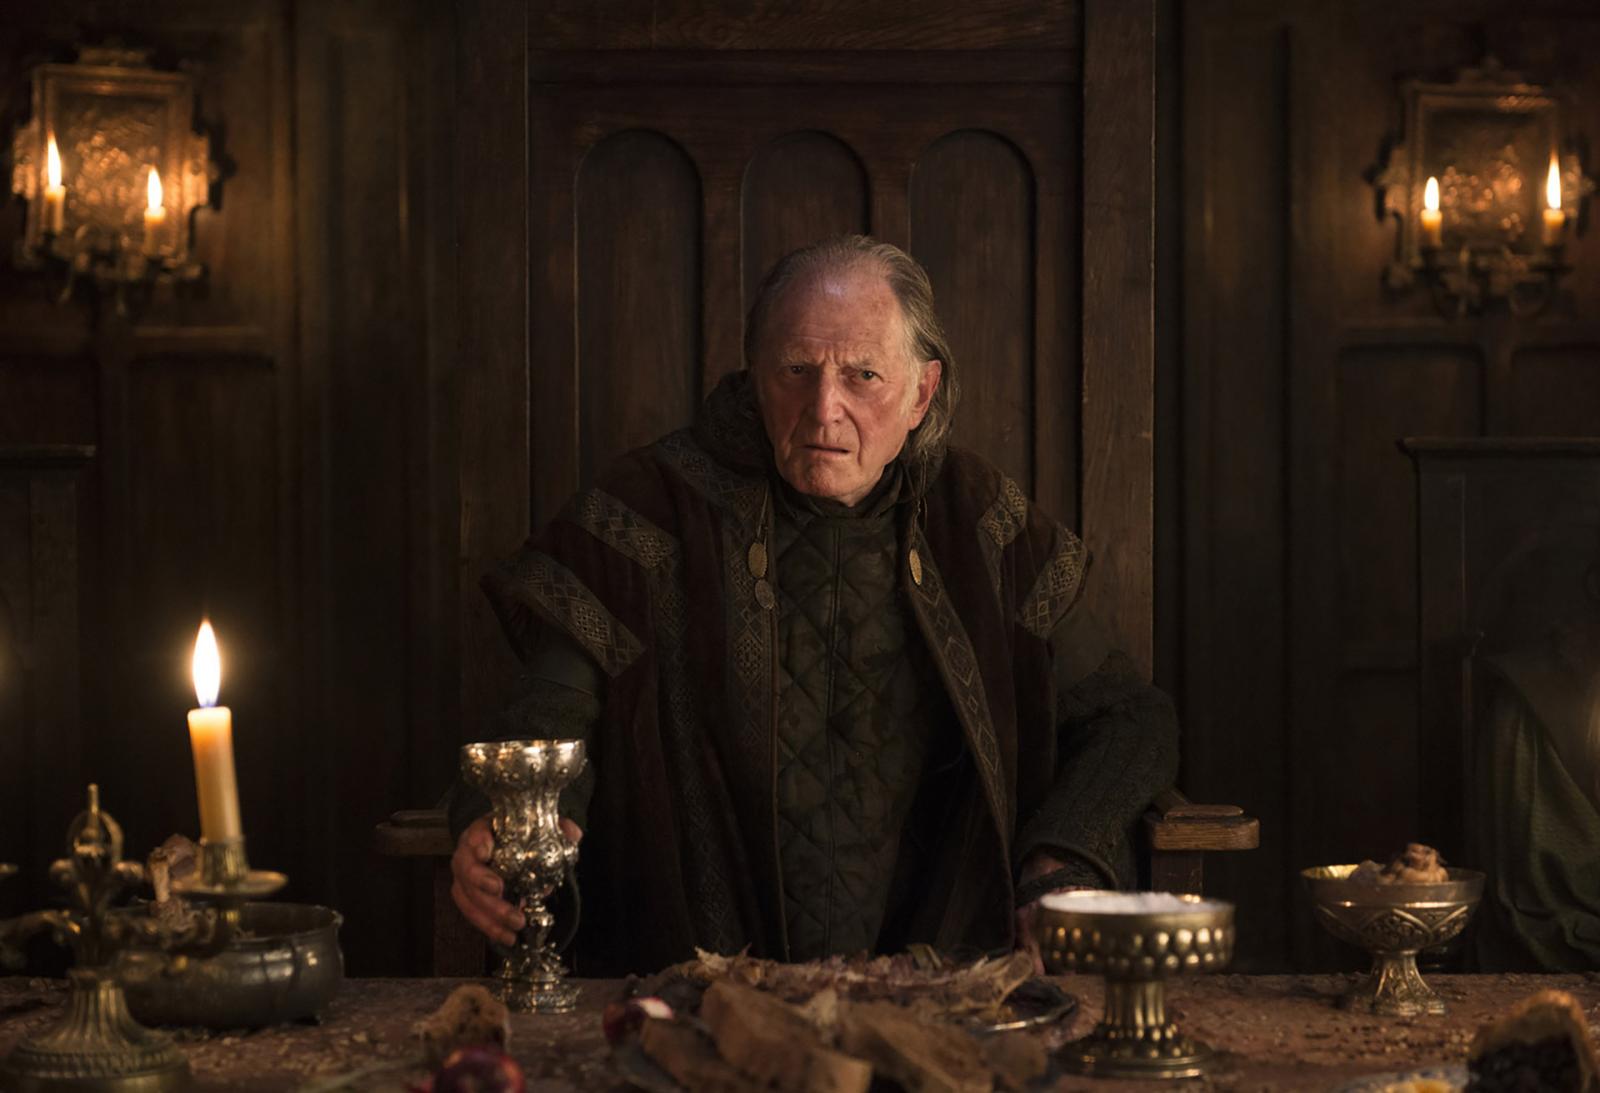 5 Most Evil Game of Thrones Characters, Ranked from Worst to… Even Worse - image 1